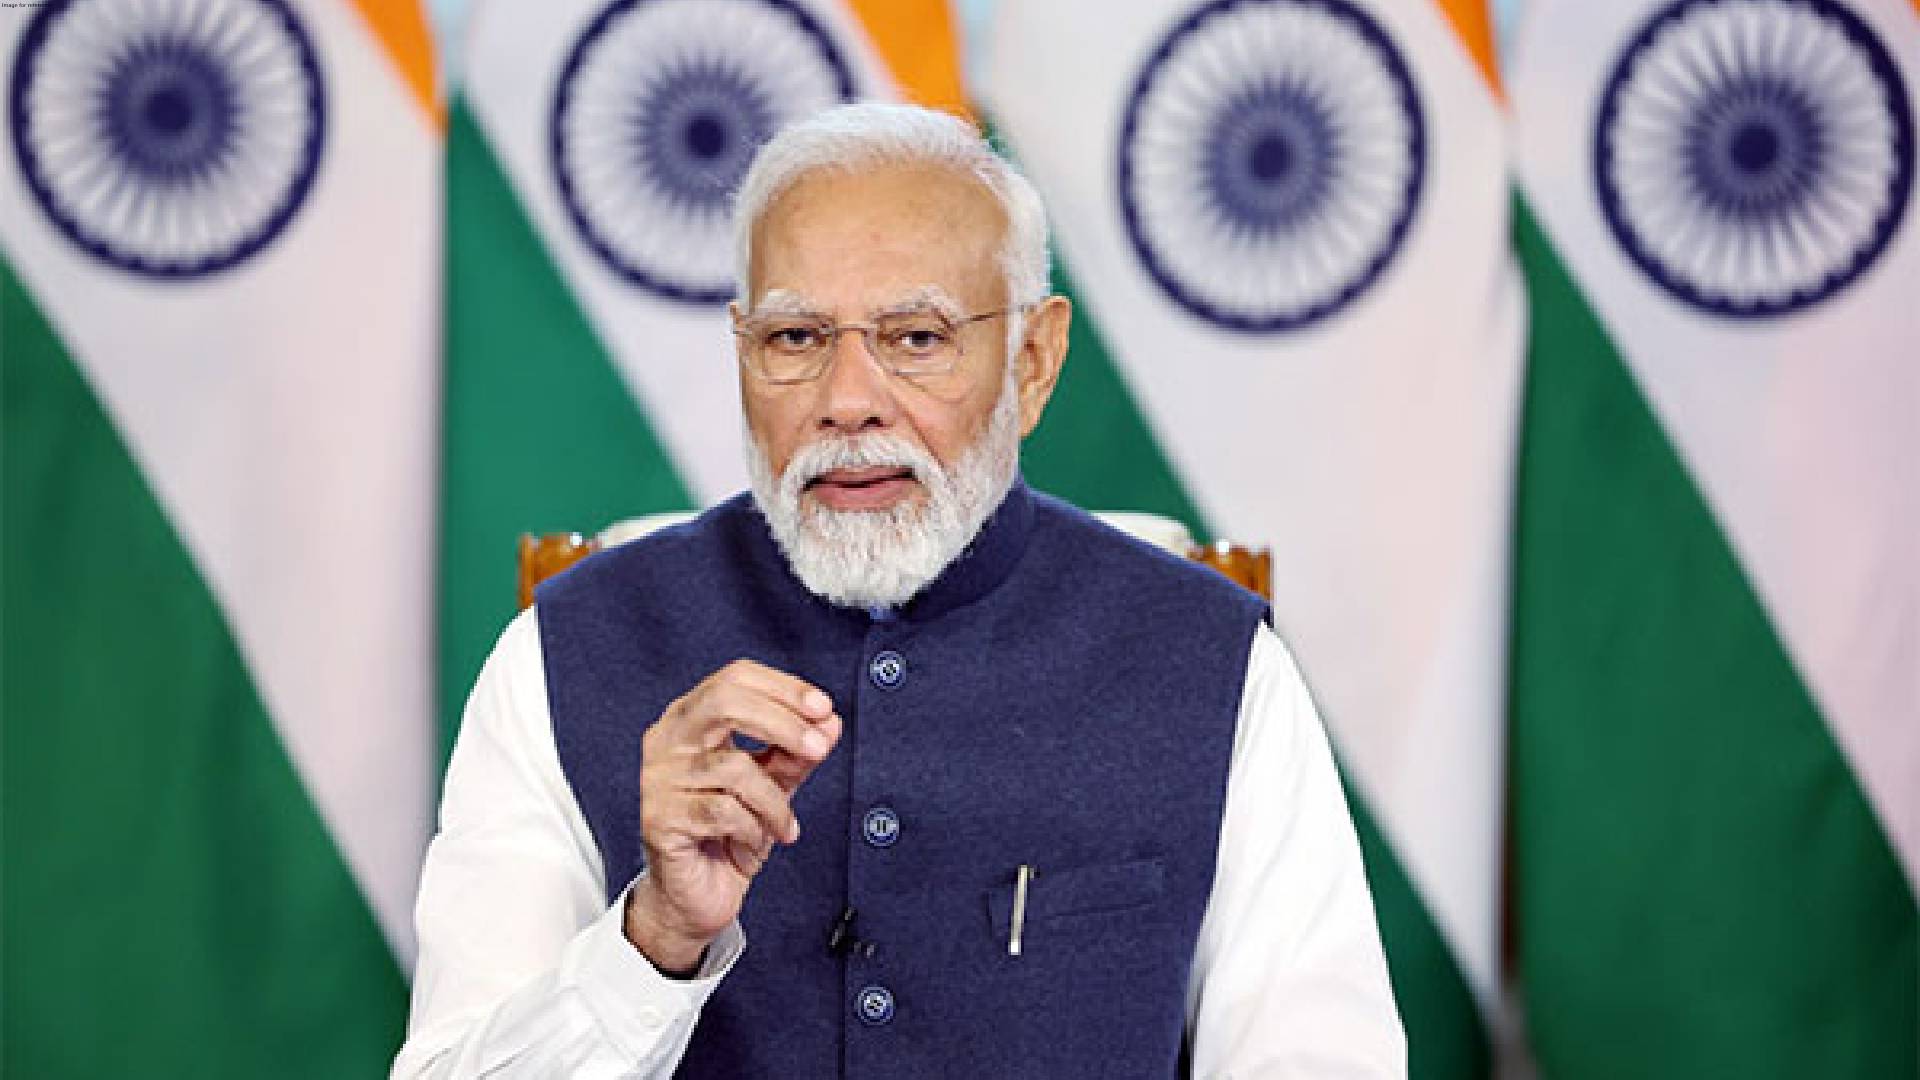 PM Modi hails Supreme Court's judgement on immunity to lawmakers in bribery cases